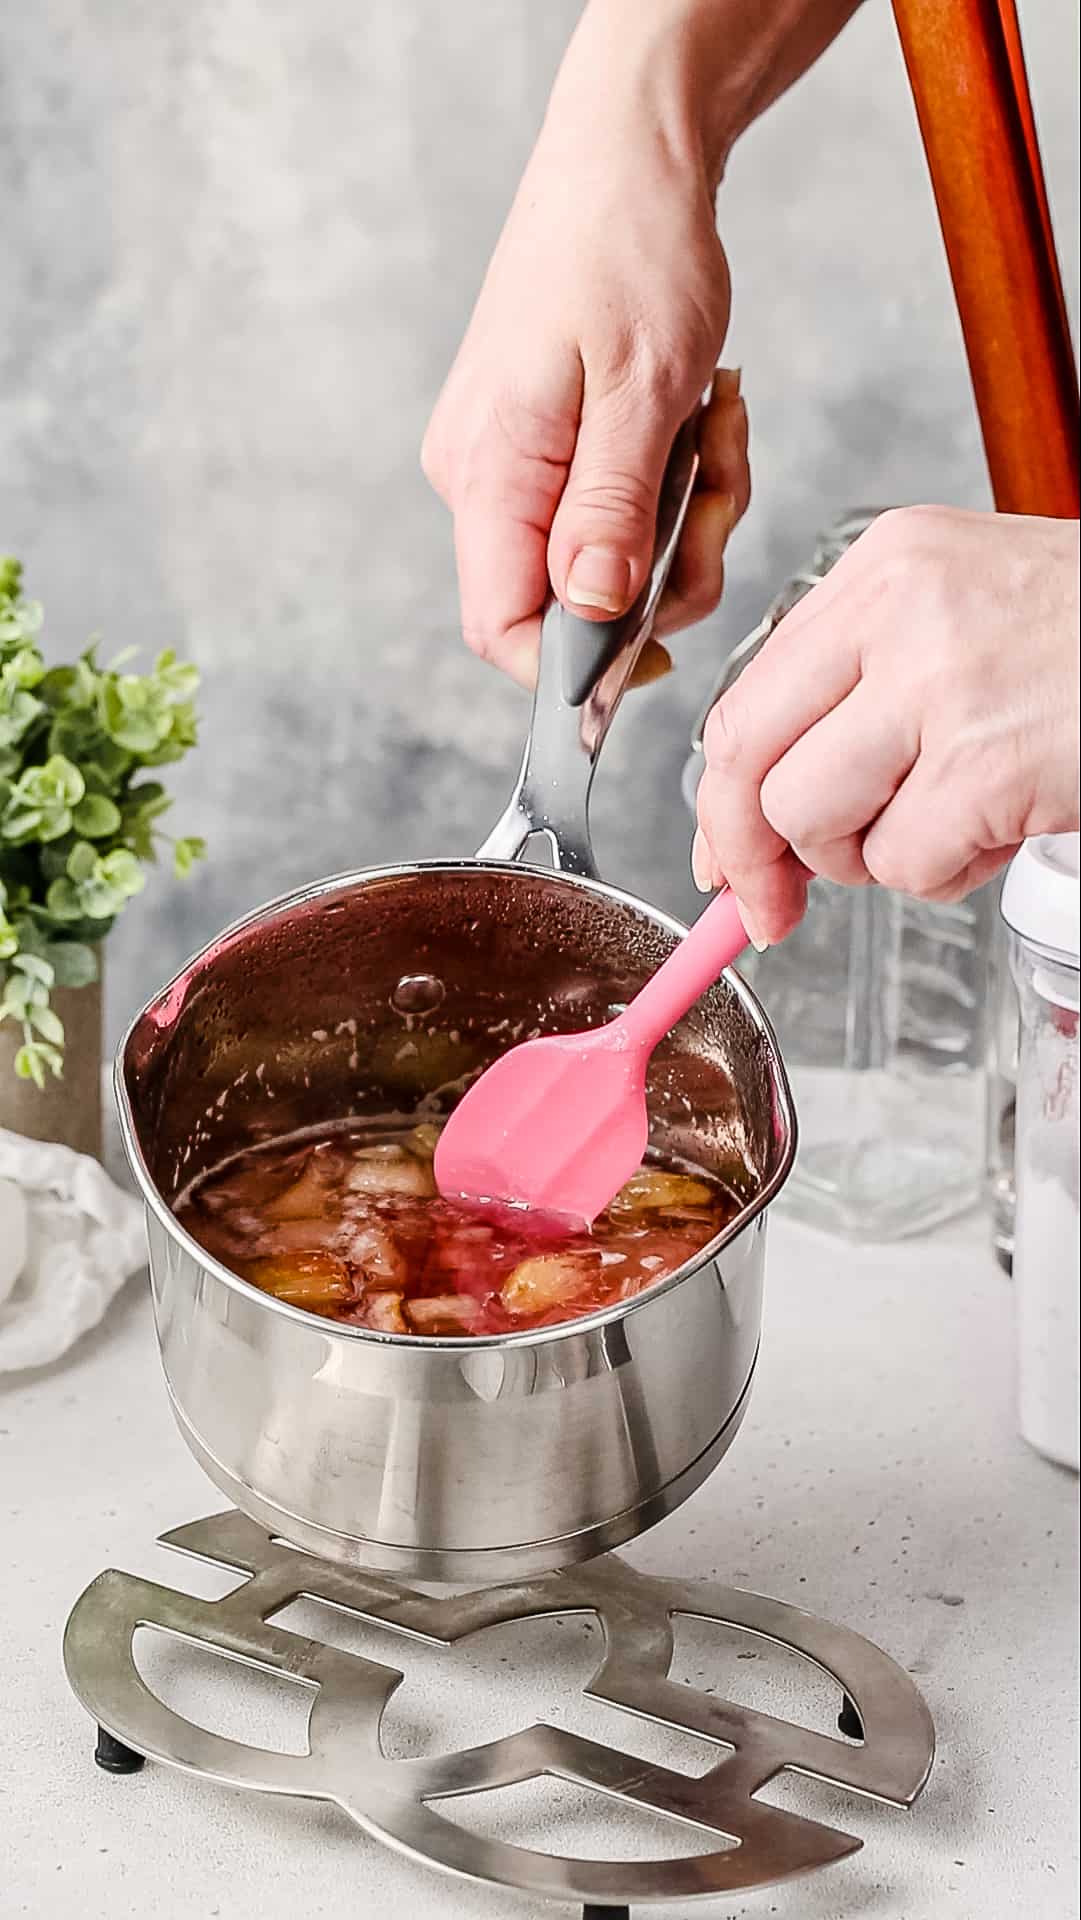 Hands using a spatula to show how the rhubarb is cooked and breaking into strands in the saucepan.